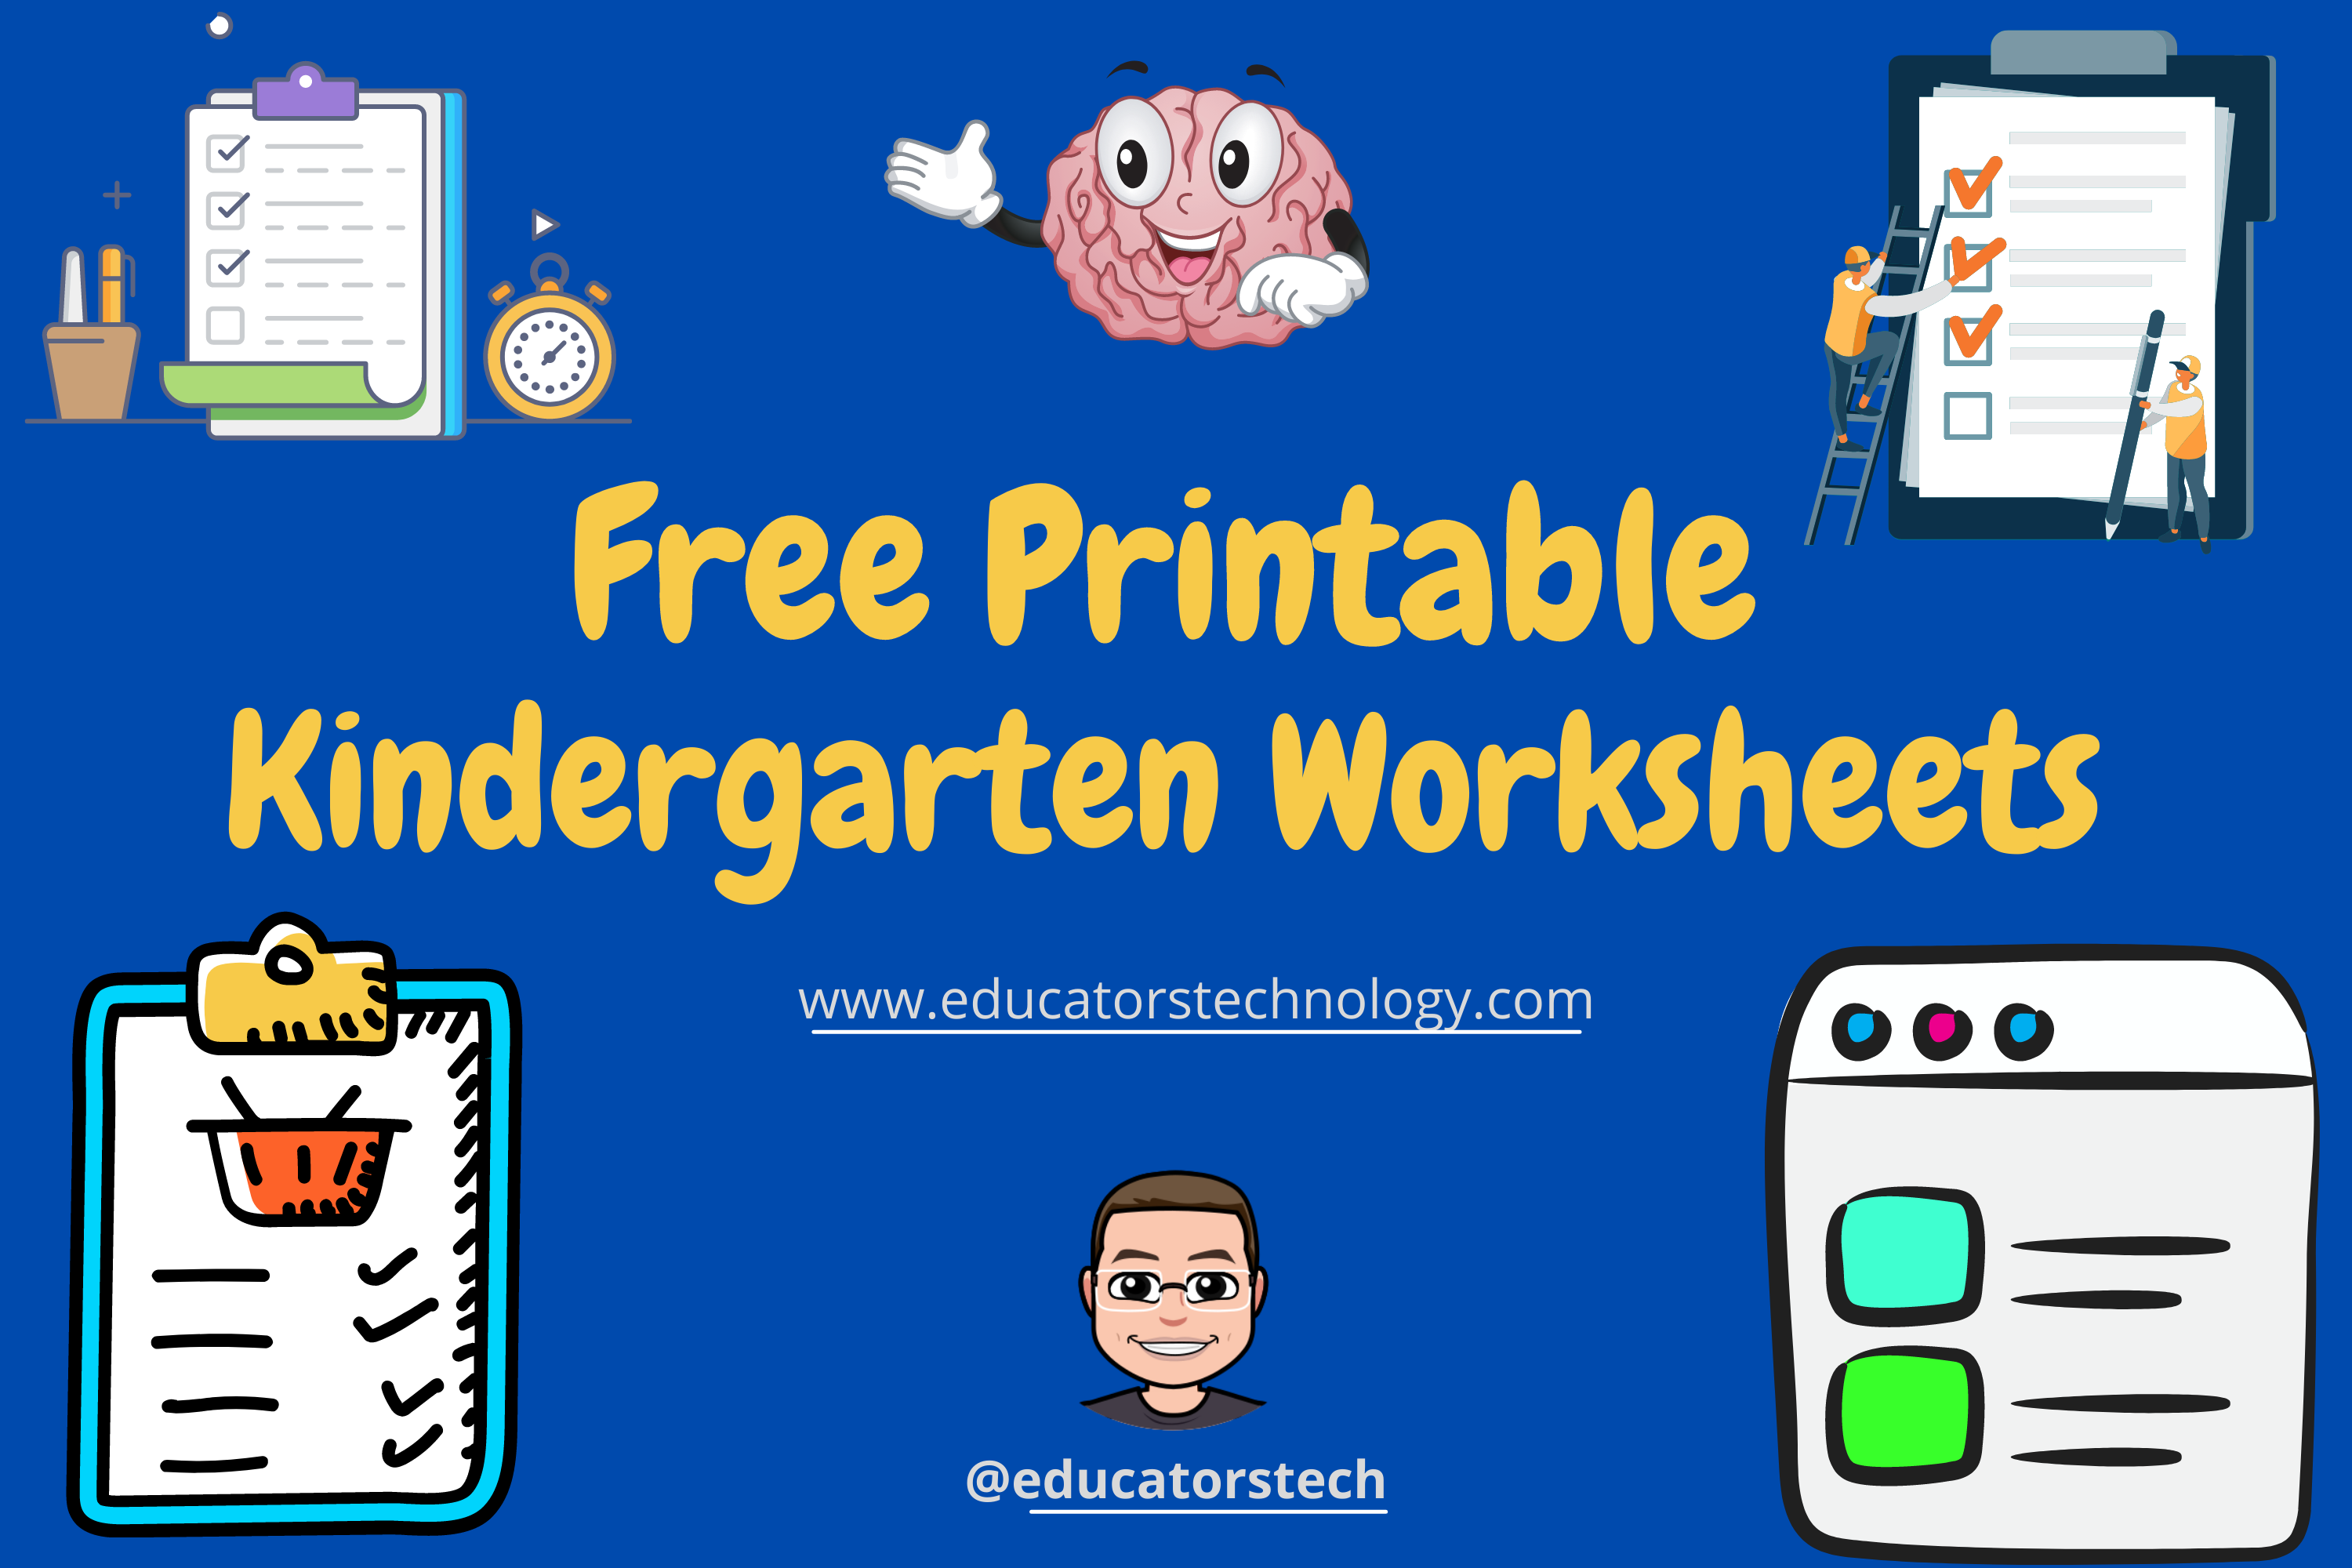 Free Printable Kindergarten Worksheets to Use with Your Kids